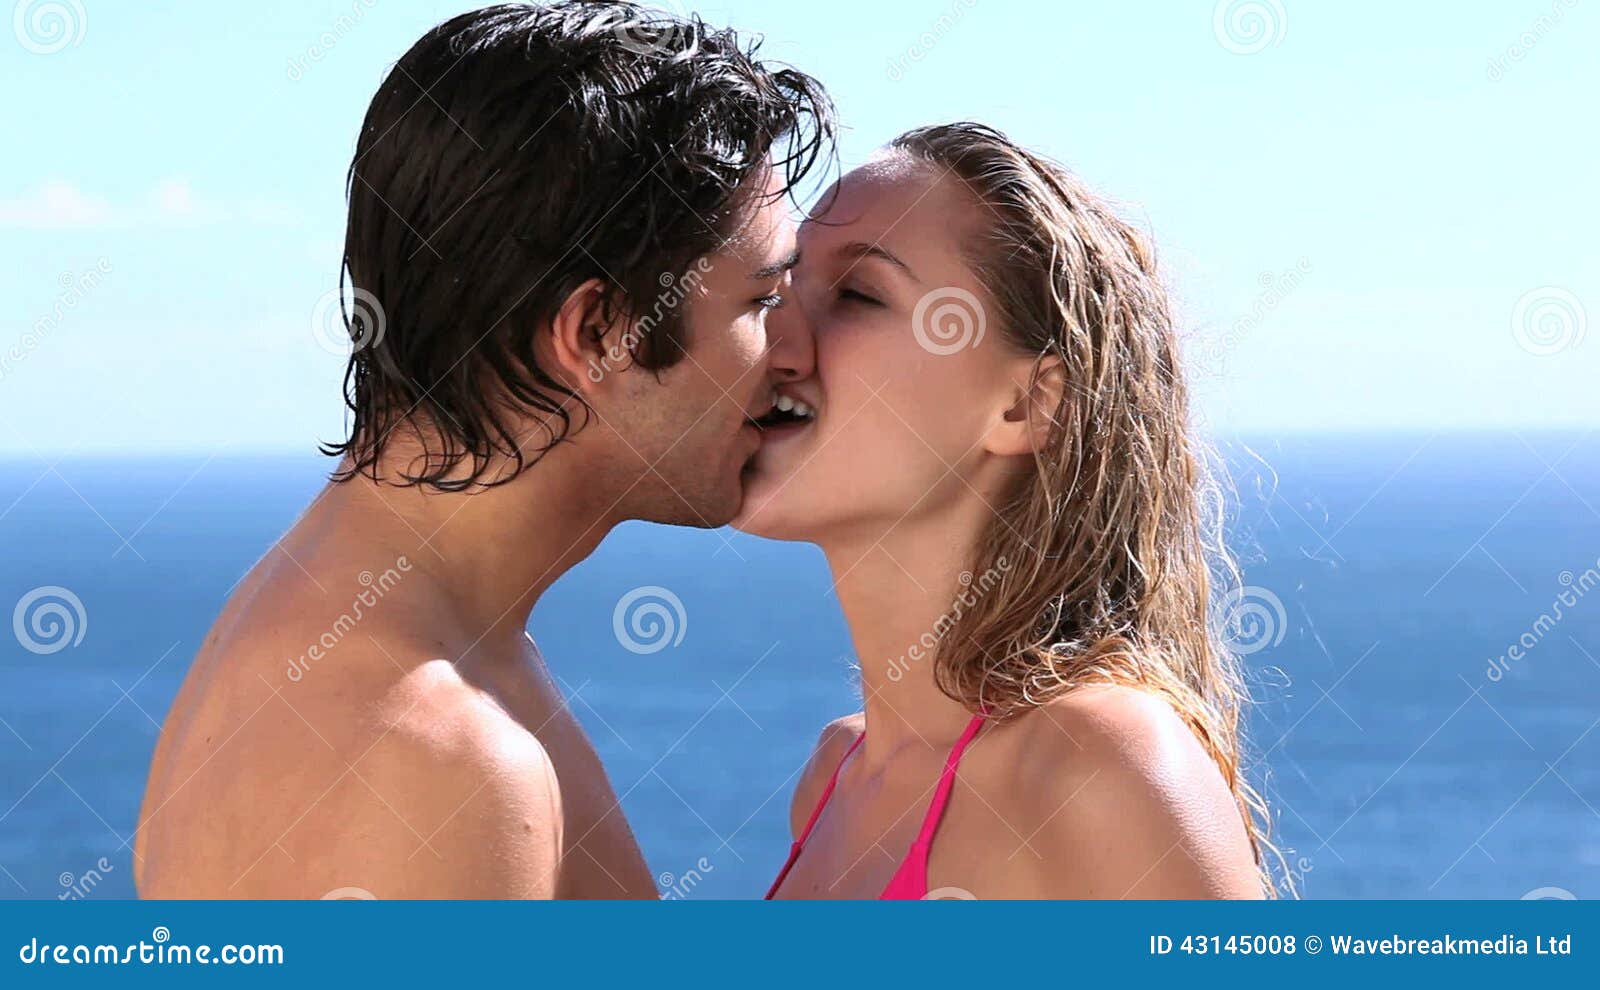 atsushi ito add guys making out on the beach porn videos photo